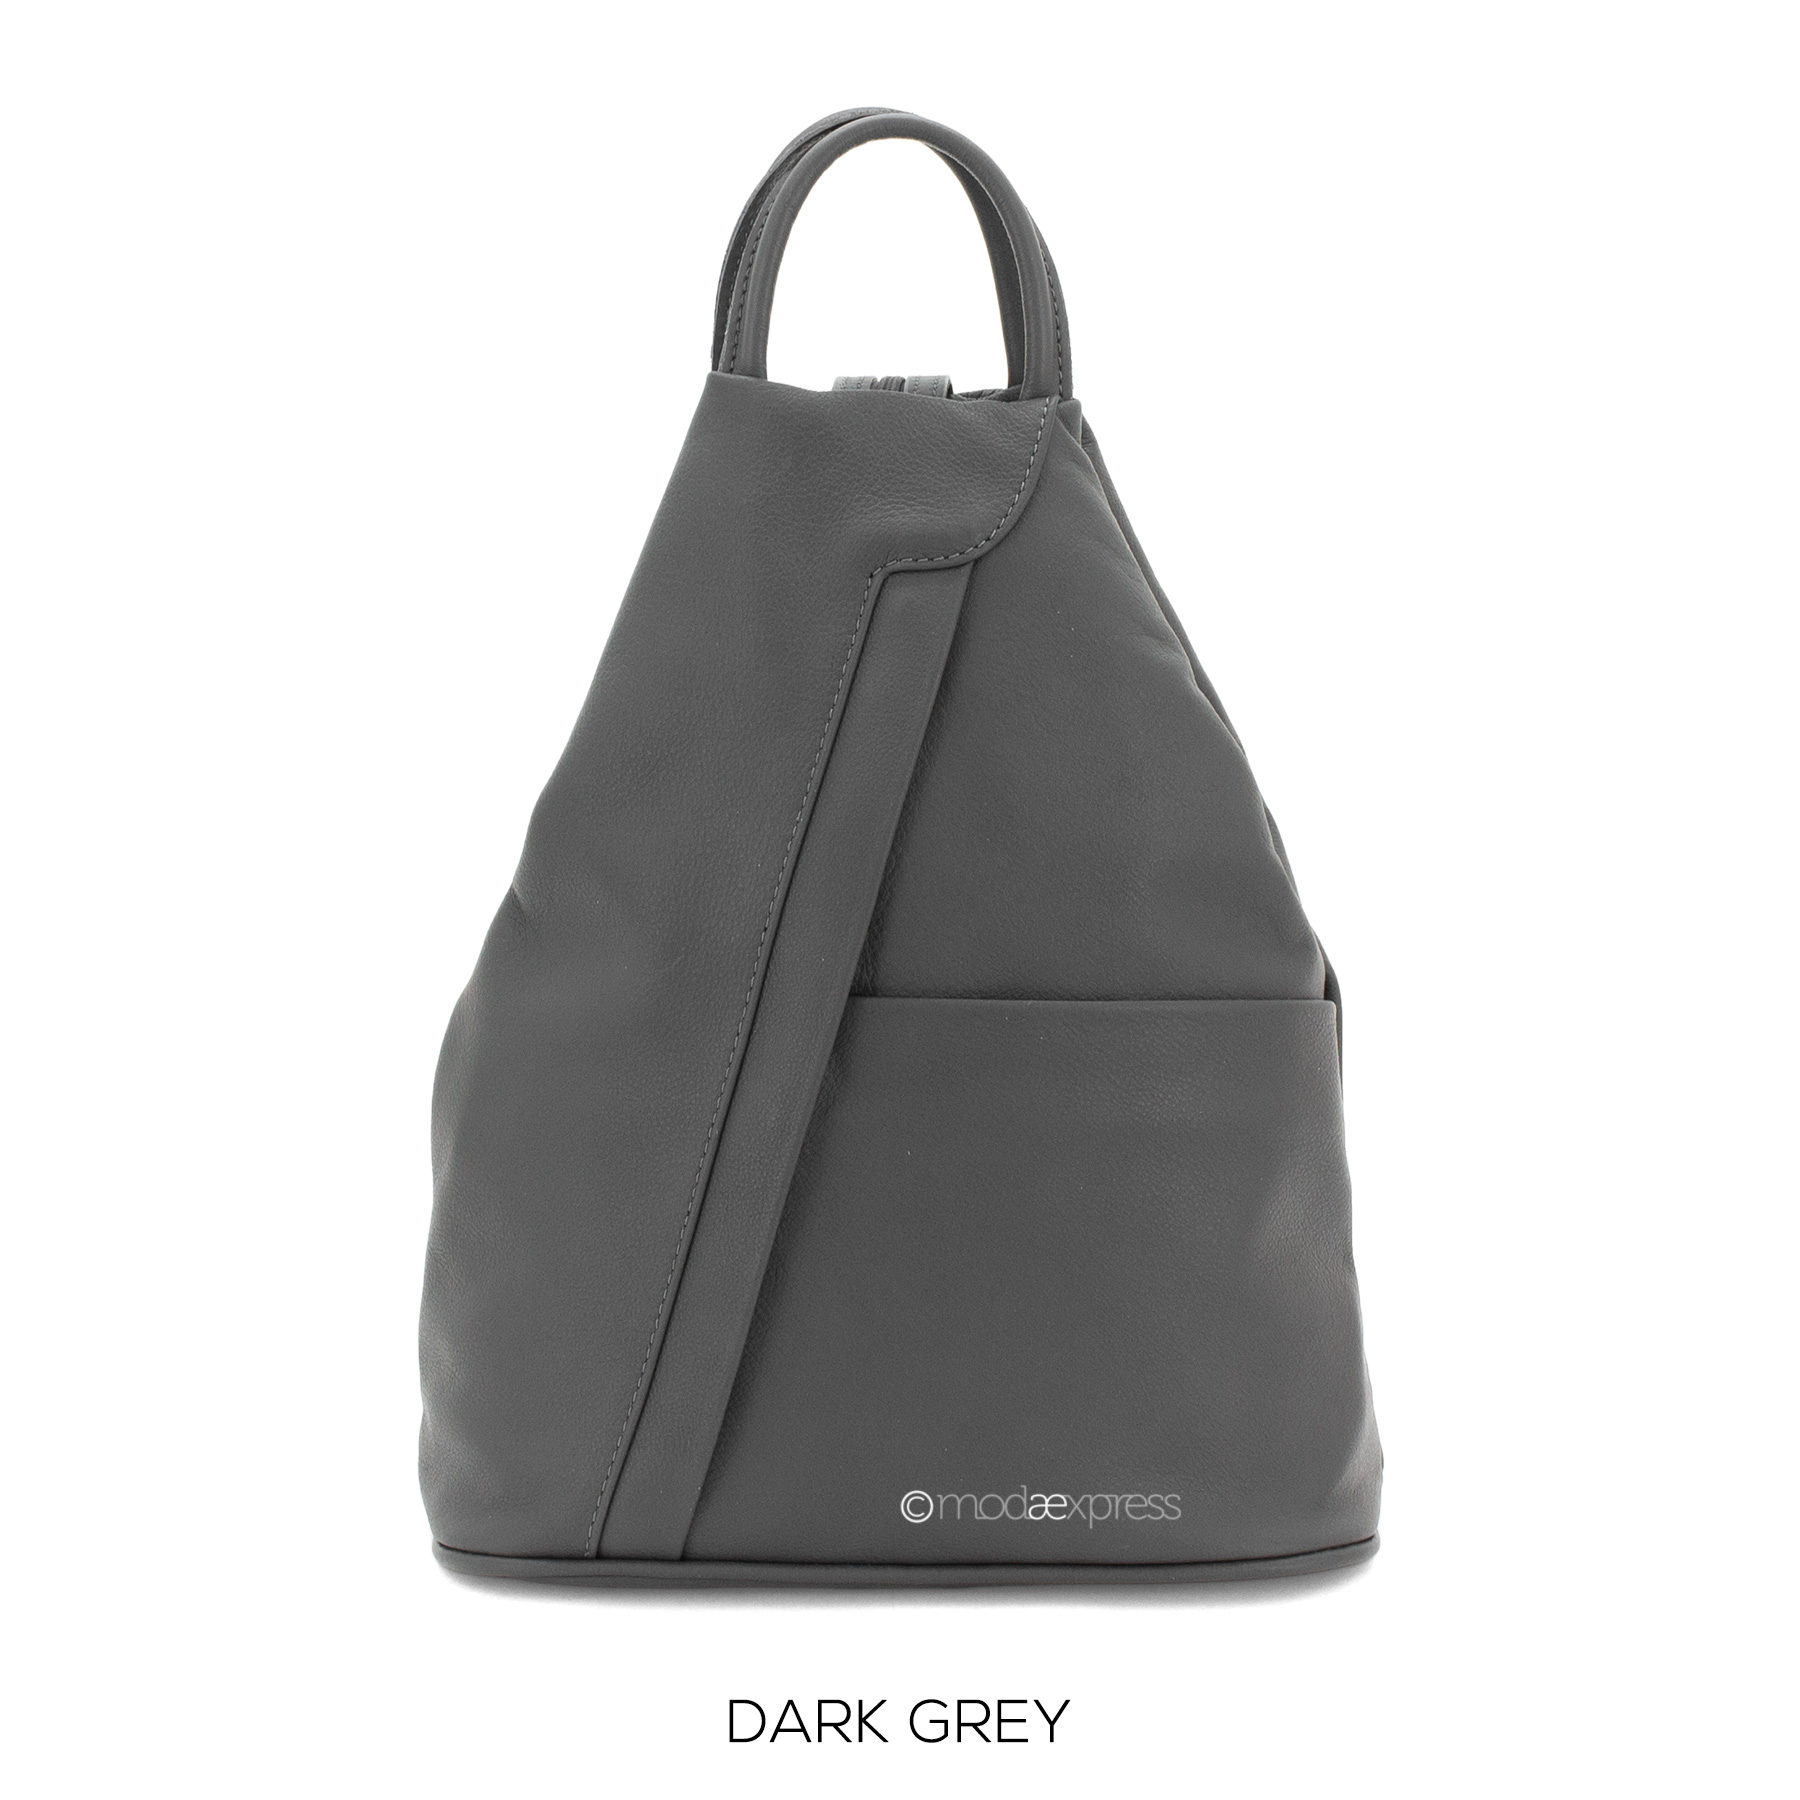 Leather Triangular Backpack Dark Grey - The Finishing Touch, Abingdon ...